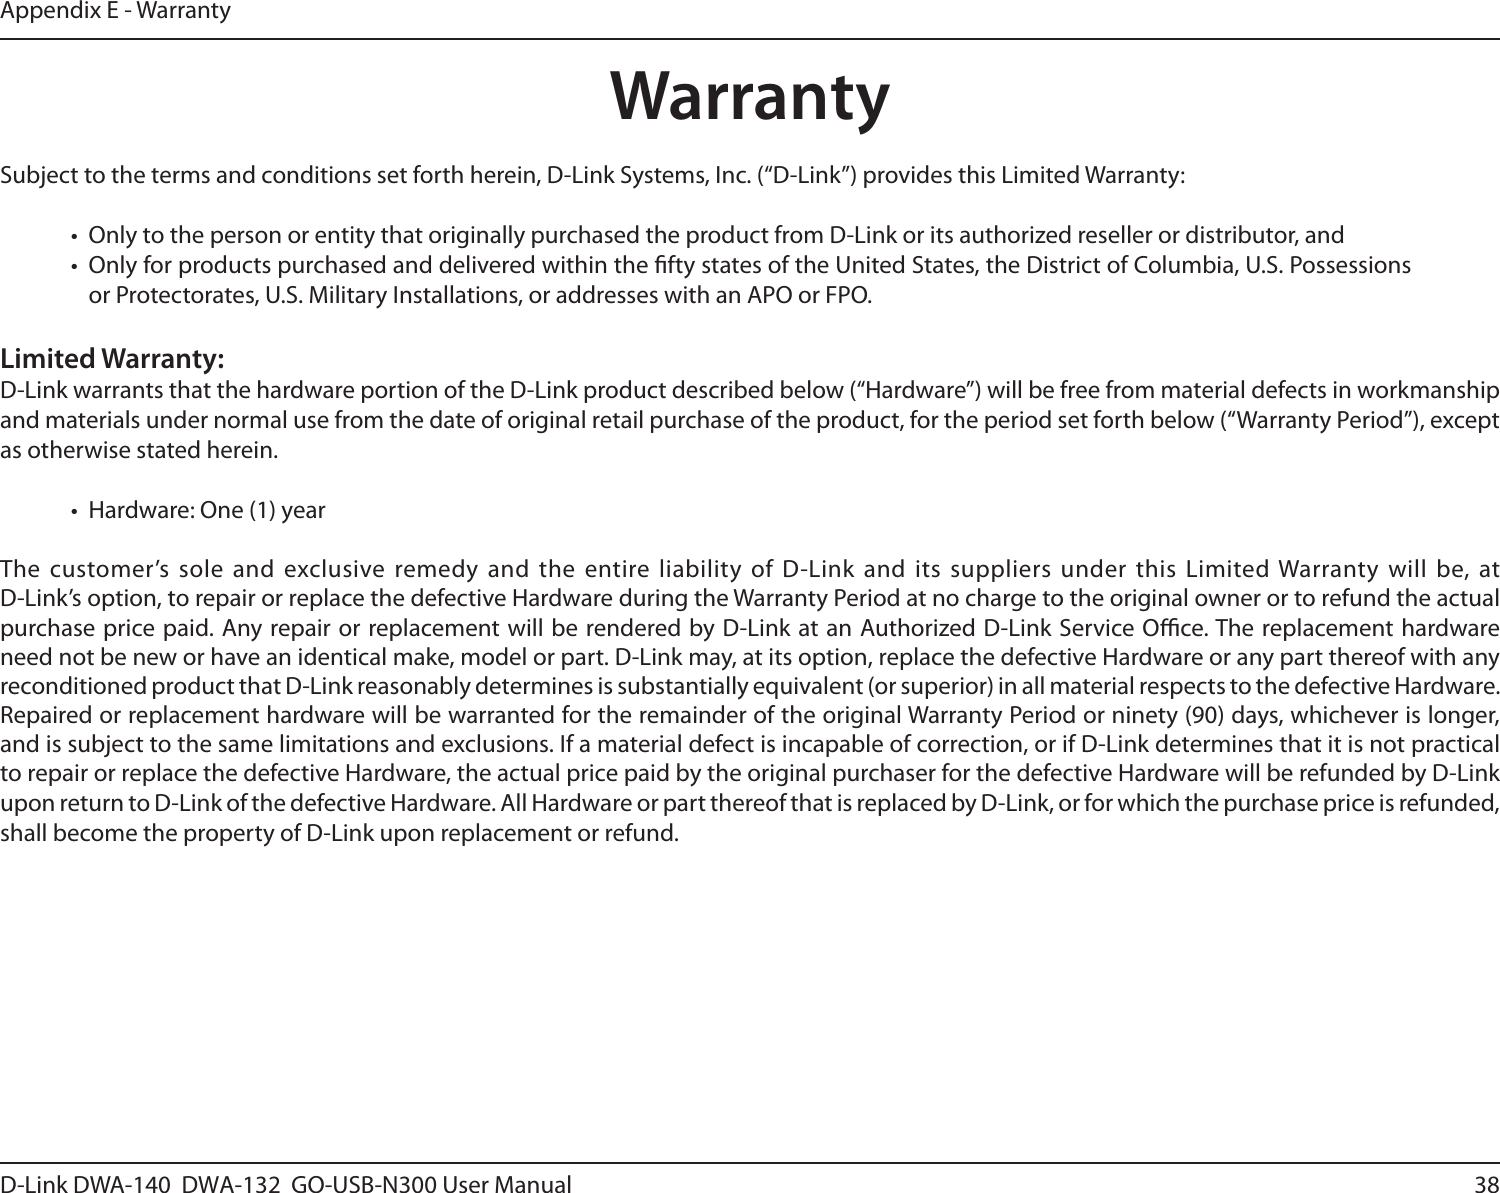 38D-Link DWA-140  DWA-132  GO-USB-N300 User M anualAppendix E - WarrantyWarrantySubject to the terms and conditions set forth herein, D-Link Systems, Inc. (“D-Link”) provides this Limited Warranty:•  Only to the person or entity that originally purchased the product from D-Link or its authorized reseller or distributor, and•  Only for products purchased and delivered within the fty states of the United States, the District of Columbia, U.S. Possessions or Protectorates, U.S. Military Installations, or addresses with an APO or FPO.Limited Warranty:D-Link warrants that the hardware portion of the D-Link product described below (“Hardware”) will be free from material defects in workmanship and materials under normal use from the date of original retail purchase of the product, for the period set forth below (“Warranty Period”), except as otherwise stated herein.•  Hardware: One (1) yearThe customer’s sole and  exclusive  remedy and the  entire liability of  D-Link  and its suppliers  under this  Limited Warranty will  be, at  D-Link’s option, to repair or replace the defective Hardware during the Warranty Period at no charge to the original owner or to refund the actual purchase price paid. Any repair or replacement will be rendered by D-Link  at an Authorized D-Link  Service Oce. The replacement hardware need not be new or have an identical make, model or part. D-Link may, at its option, replace the defective Hardware or any part thereof with any reconditioned product that D-Link reasonably determines is substantially equivalent (or superior) in all material respects to the defective Hardware. Repaired or replacement hardware will be warranted for the remainder of the original Warranty Period or ninety (90) days, whichever is longer, and is subject to the same limitations and exclusions. If a material defect is incapable of correction, or if D-Link determines that it is not practical to repair or replace the defective Hardware, the actual price paid by the original purchaser for the defective Hardware will be refunded by D-Link upon return to D-Link of the defective Hardware. All Hardware or part thereof that is replaced by D-Link, or for which the purchase price is refunded, shall become the property of D-Link upon replacement or refund.